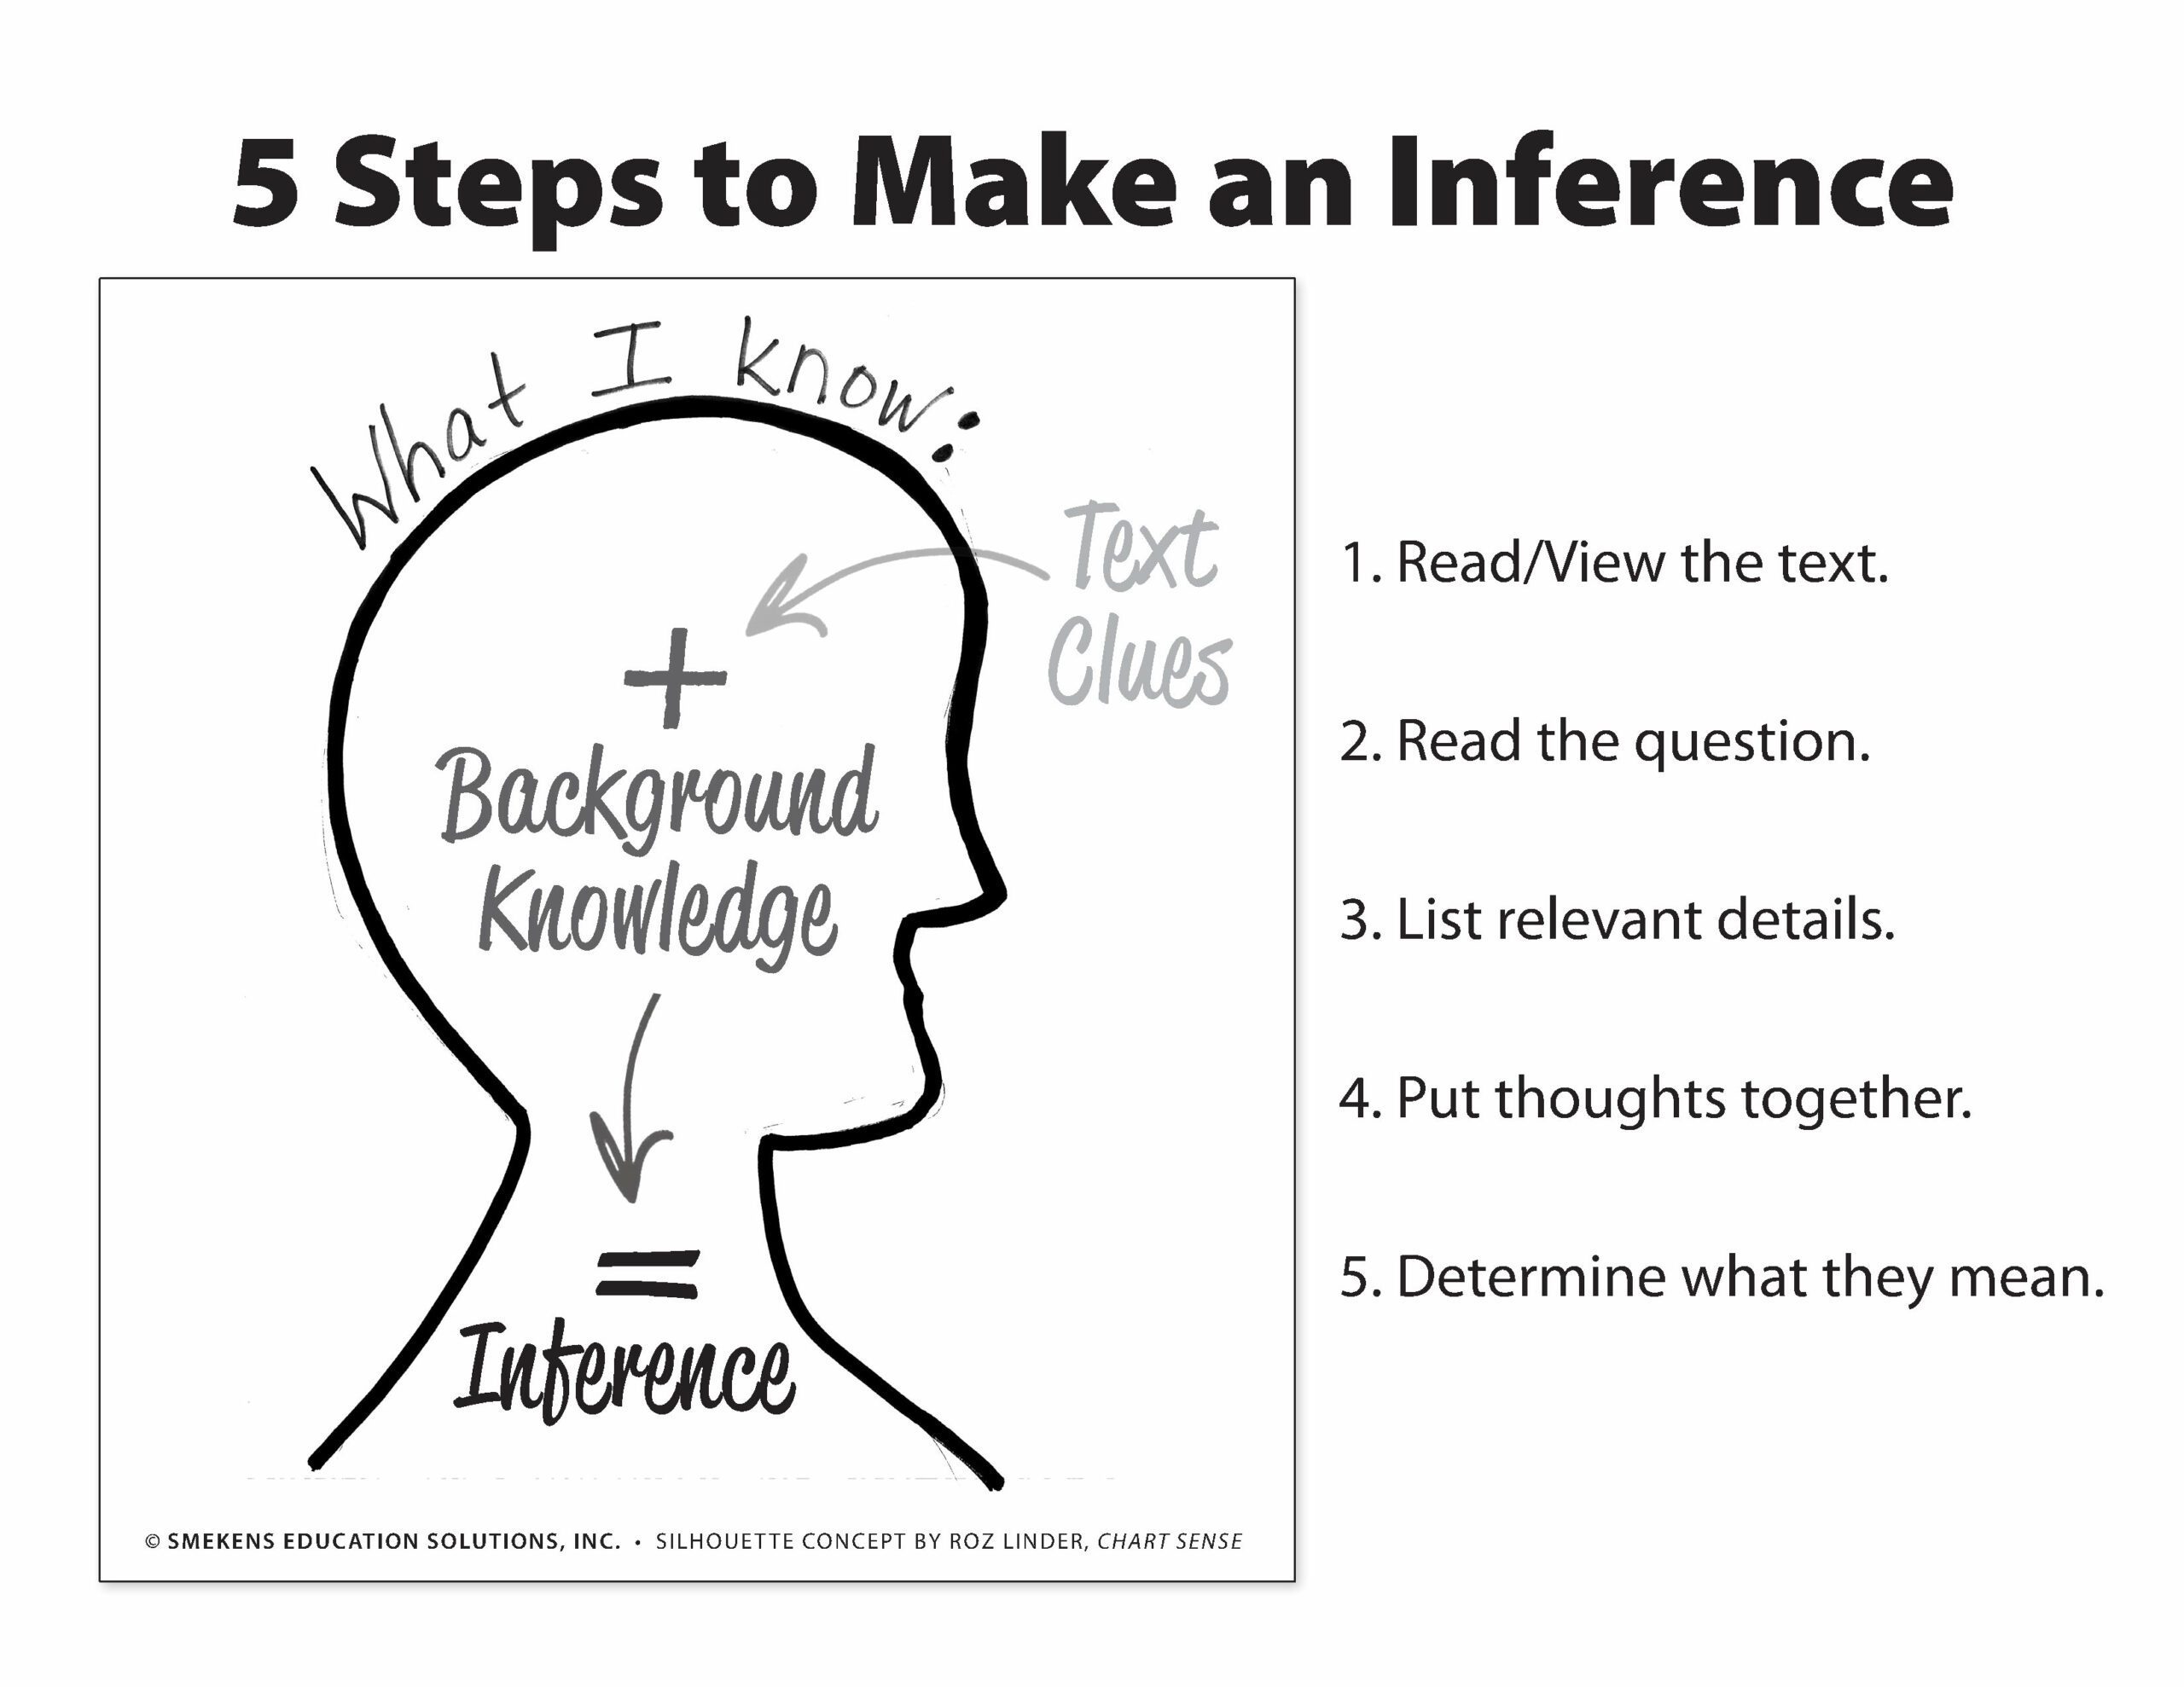 5 Steps to Make an Inference - Student Handout